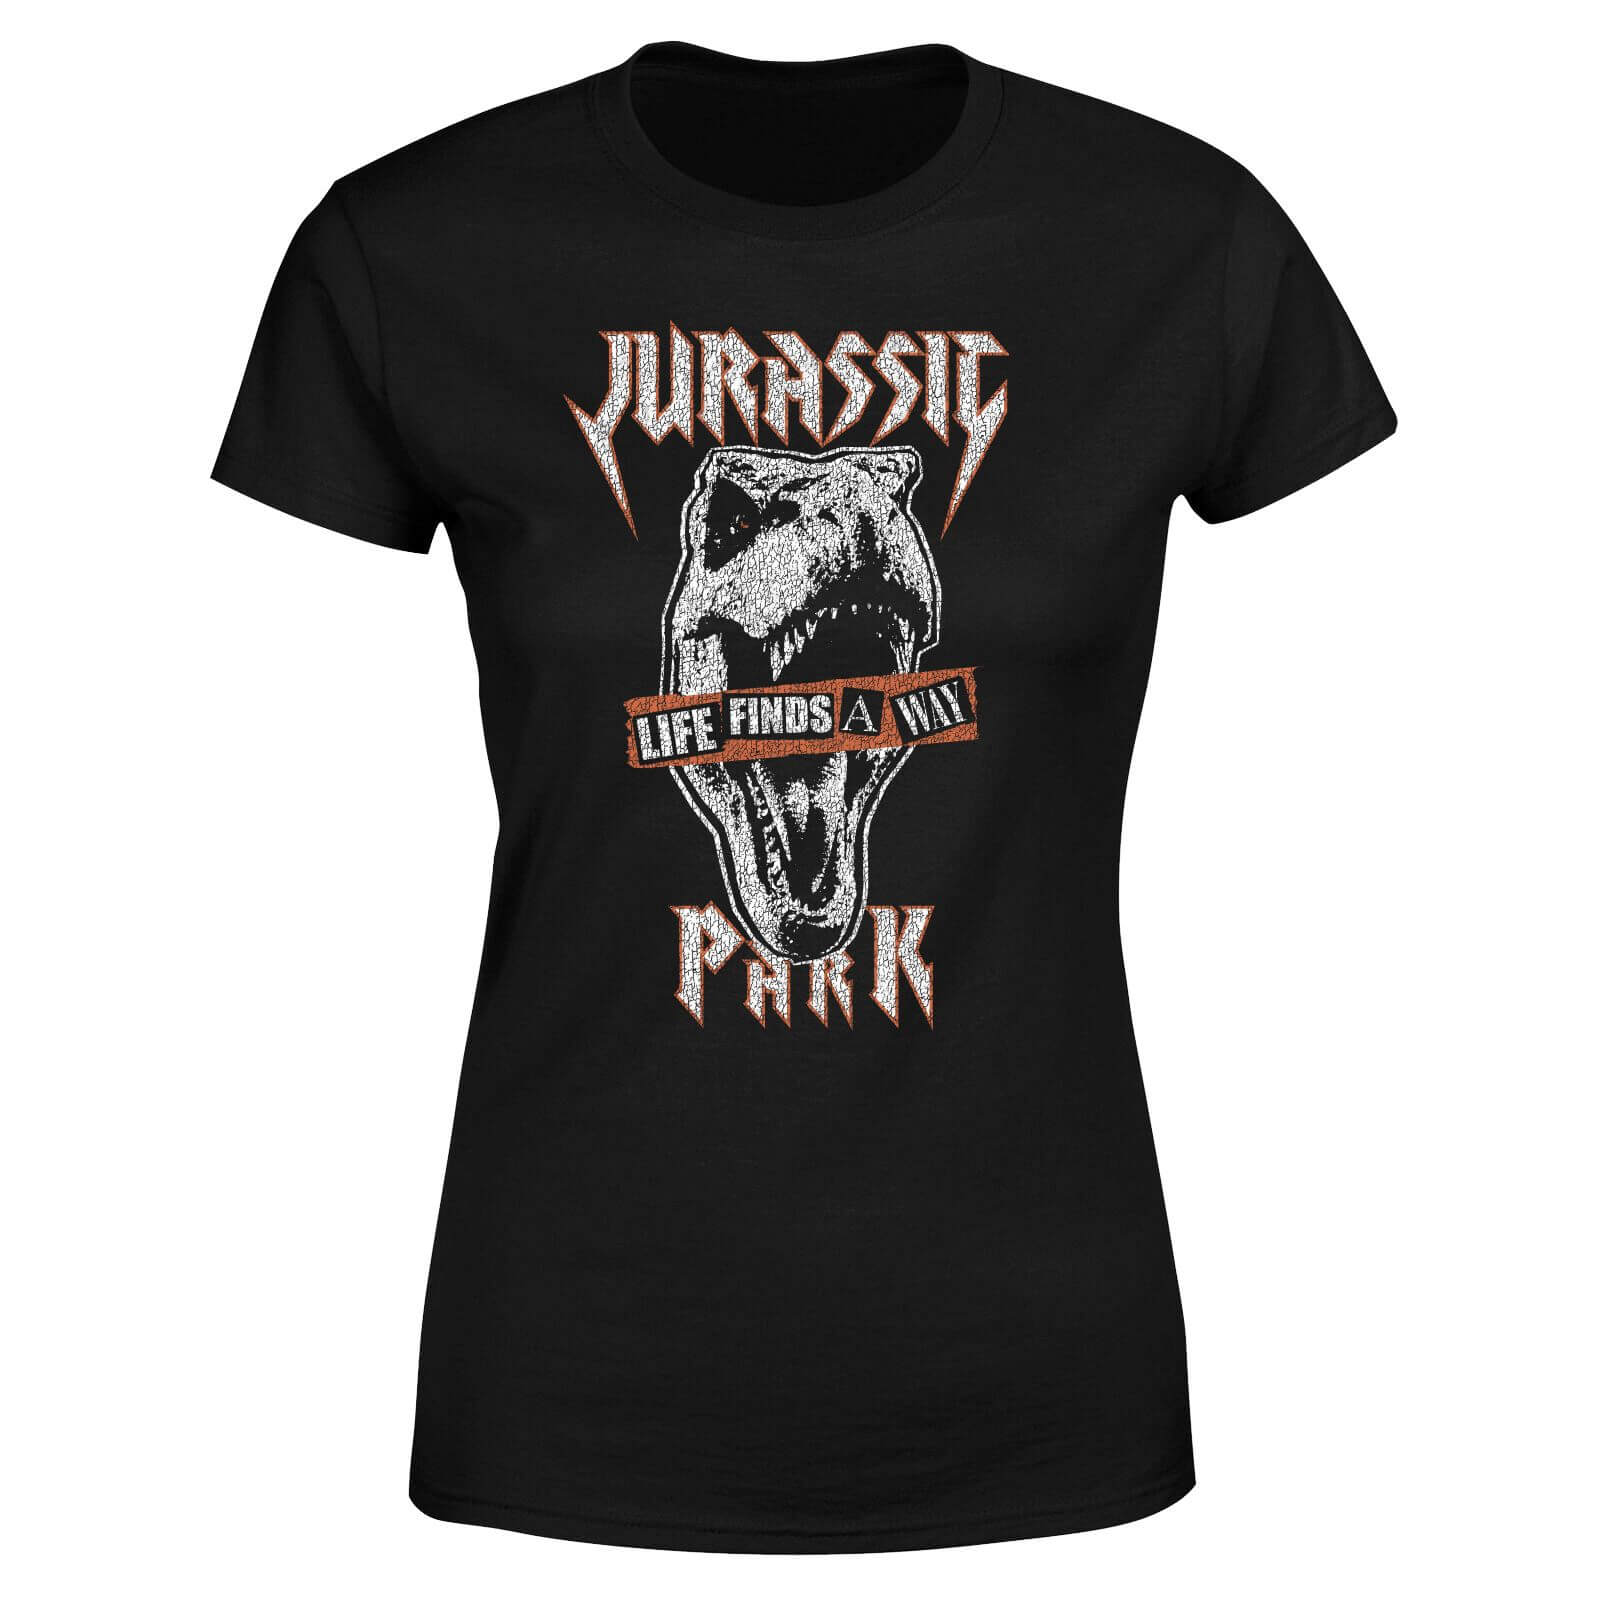 View the best prices for: jurassic park rex punk womens t-shirt